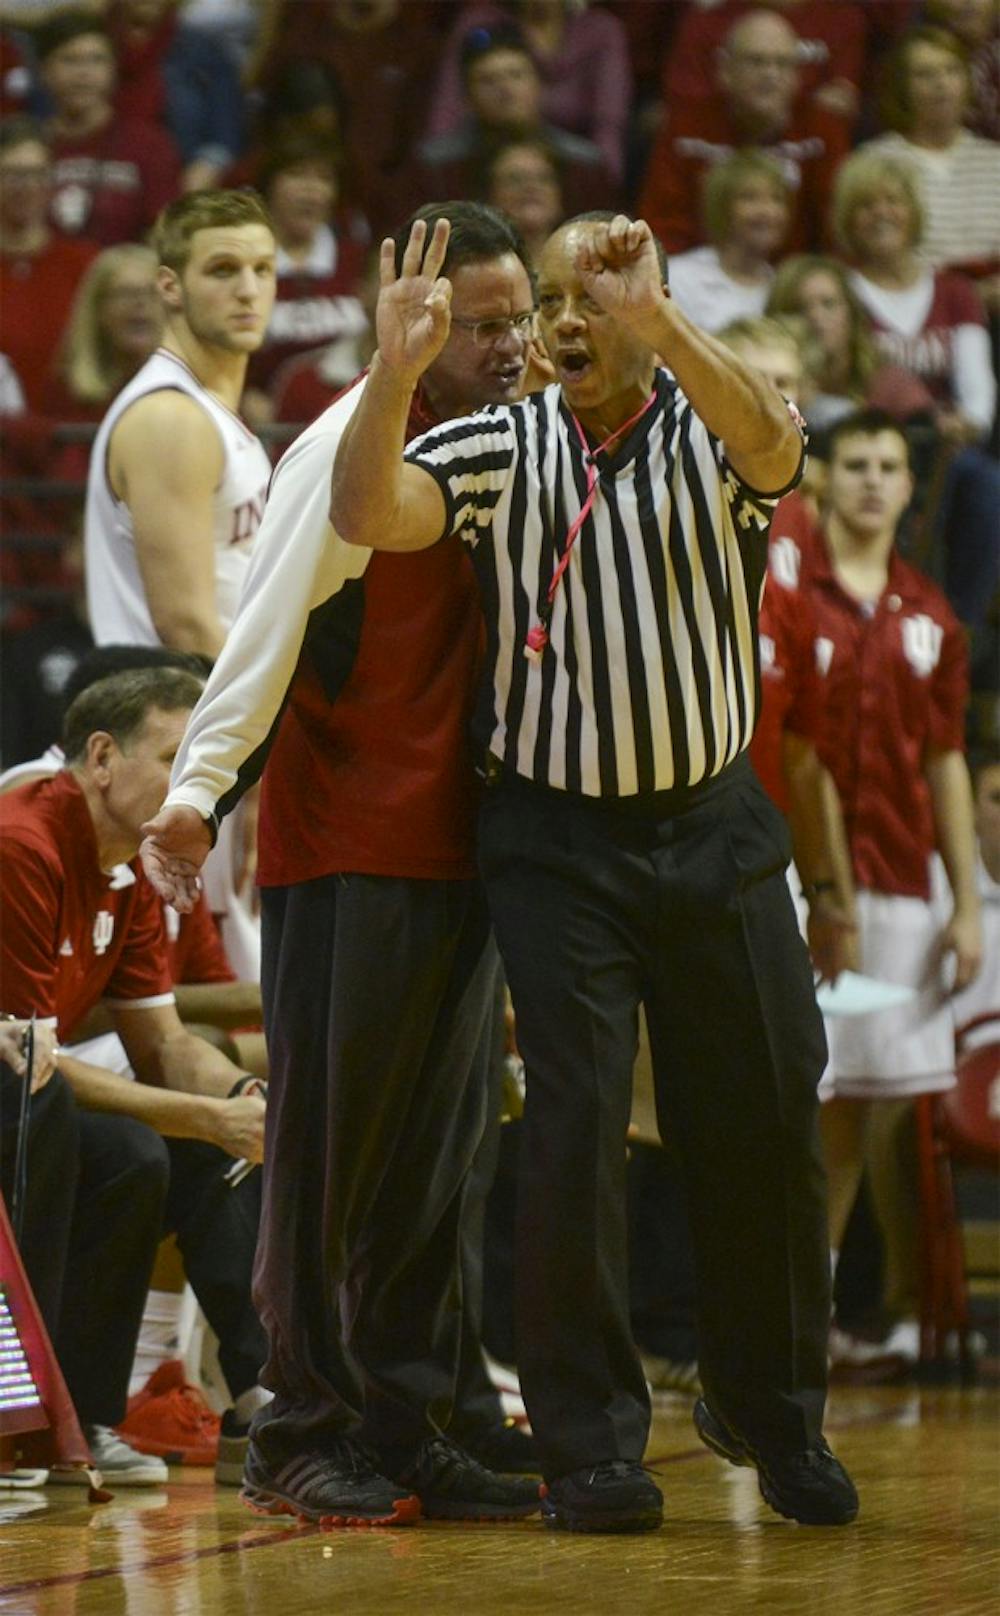 Coach Tom Crean yells at the referee after a foul was called on junior forward Collin Hartman during the game against Minnesota on Saturday at Assembly Hall.